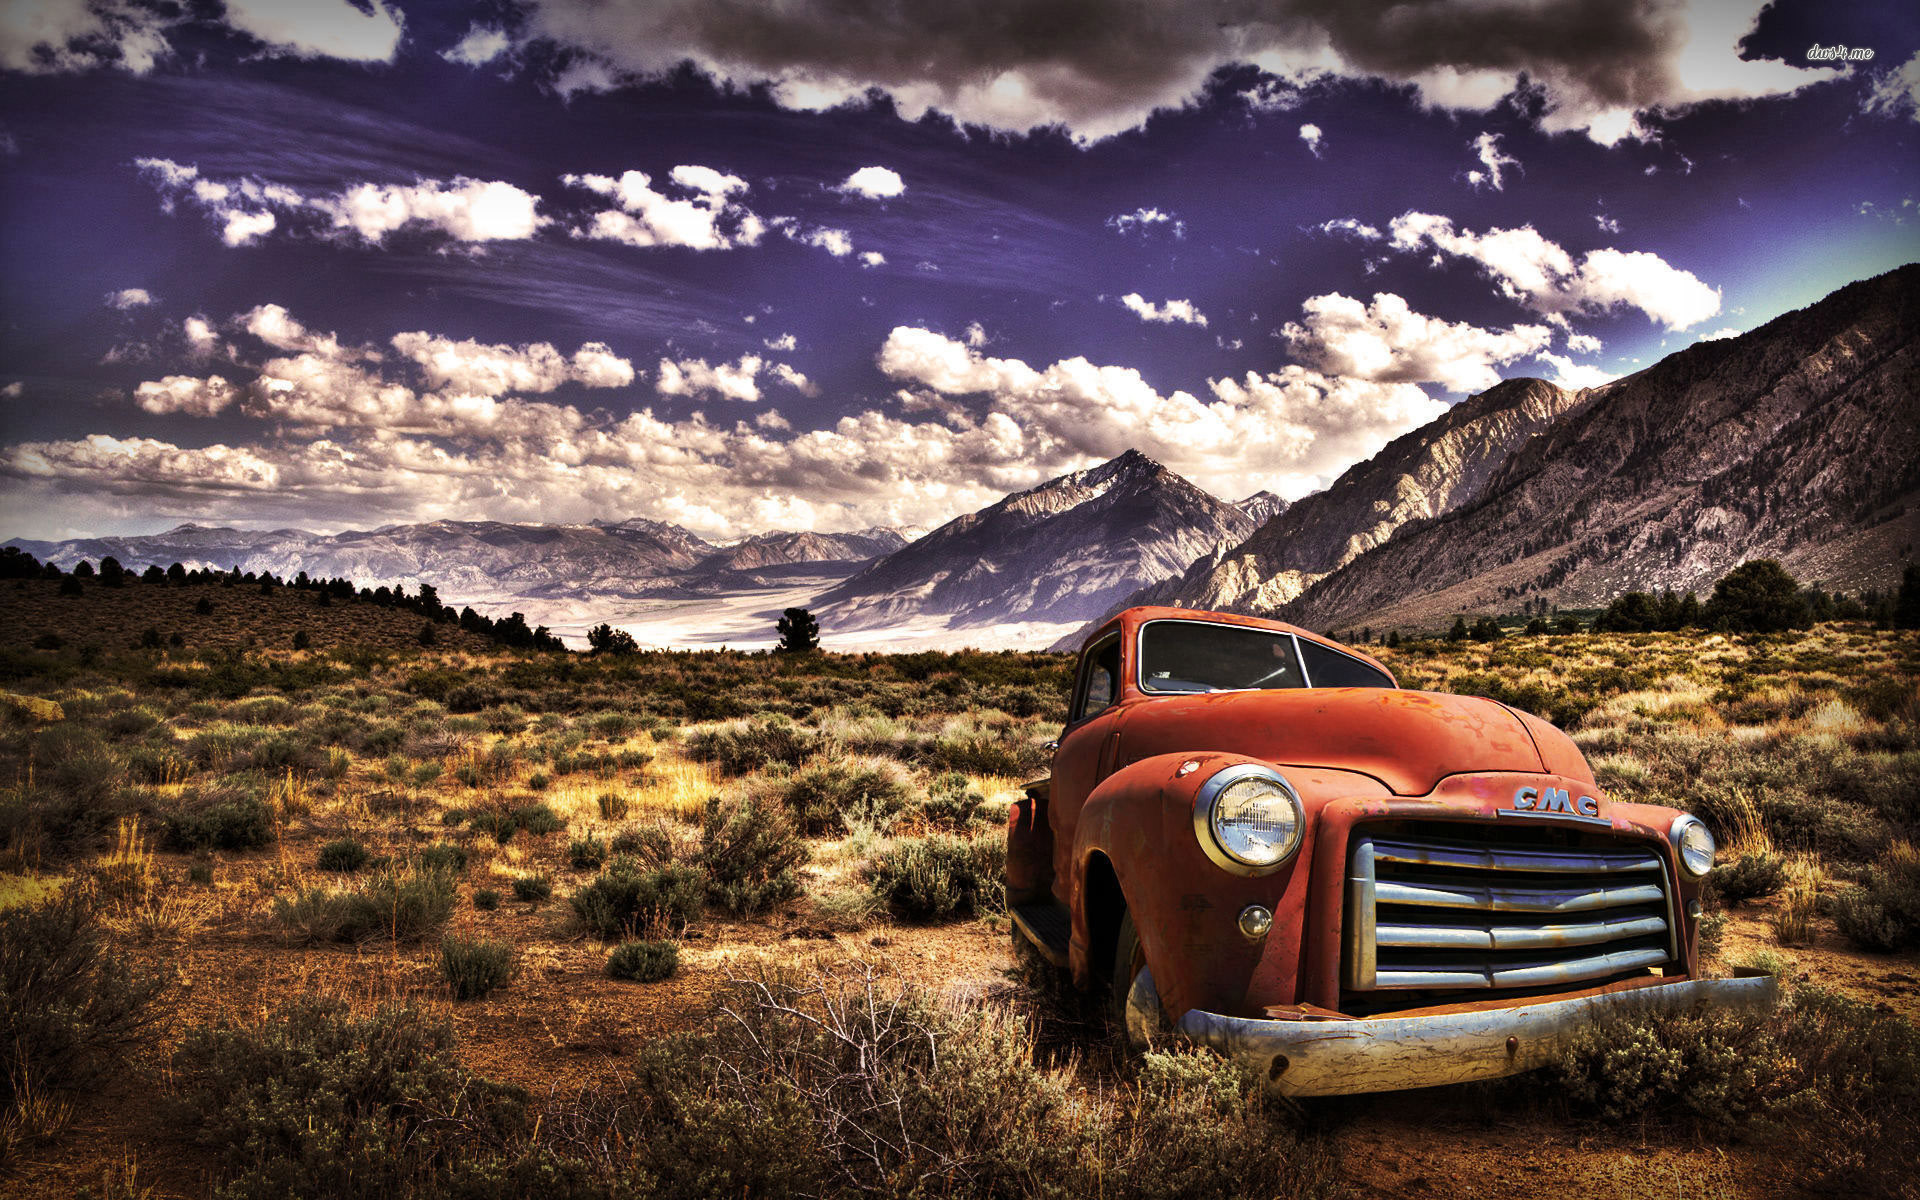 1920x1200 Old Gmc Truck In The Mountains wallpaper. Chevrolet Bowtie Wallpaper.